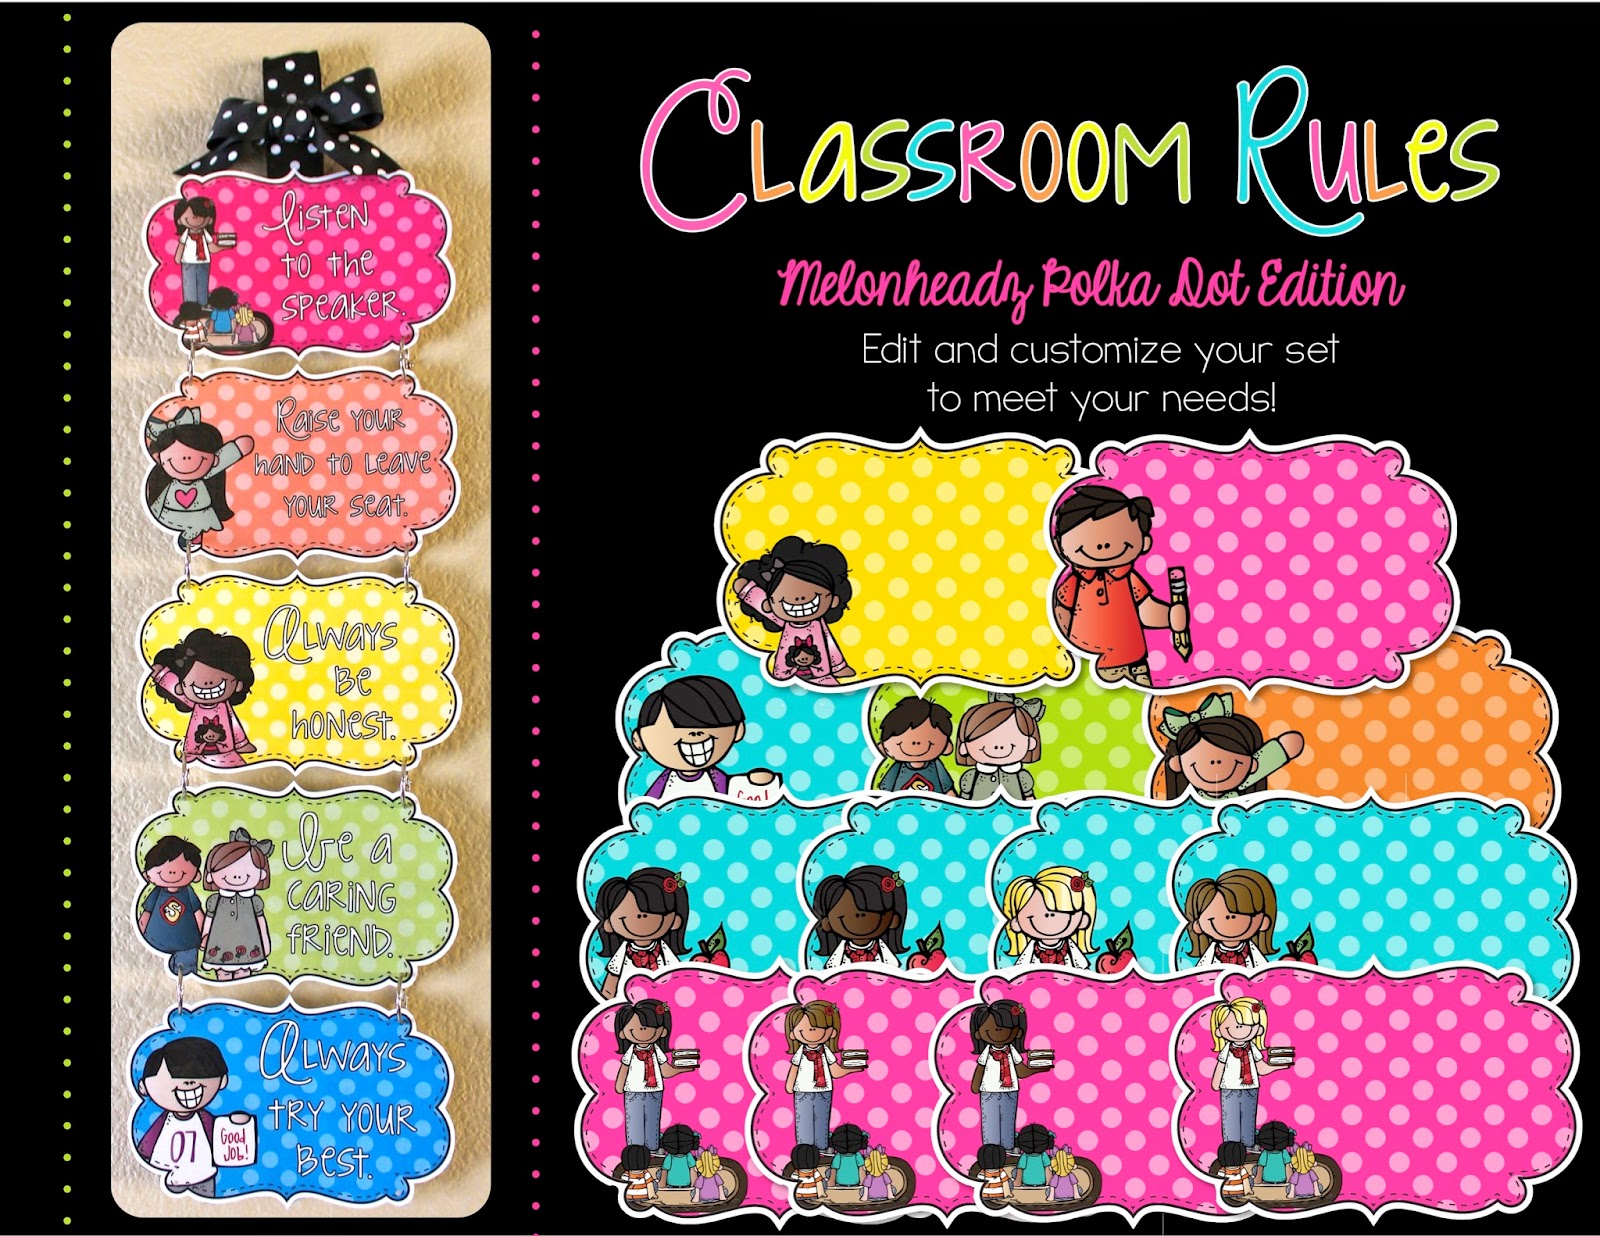 Classroom Rules Chart Images